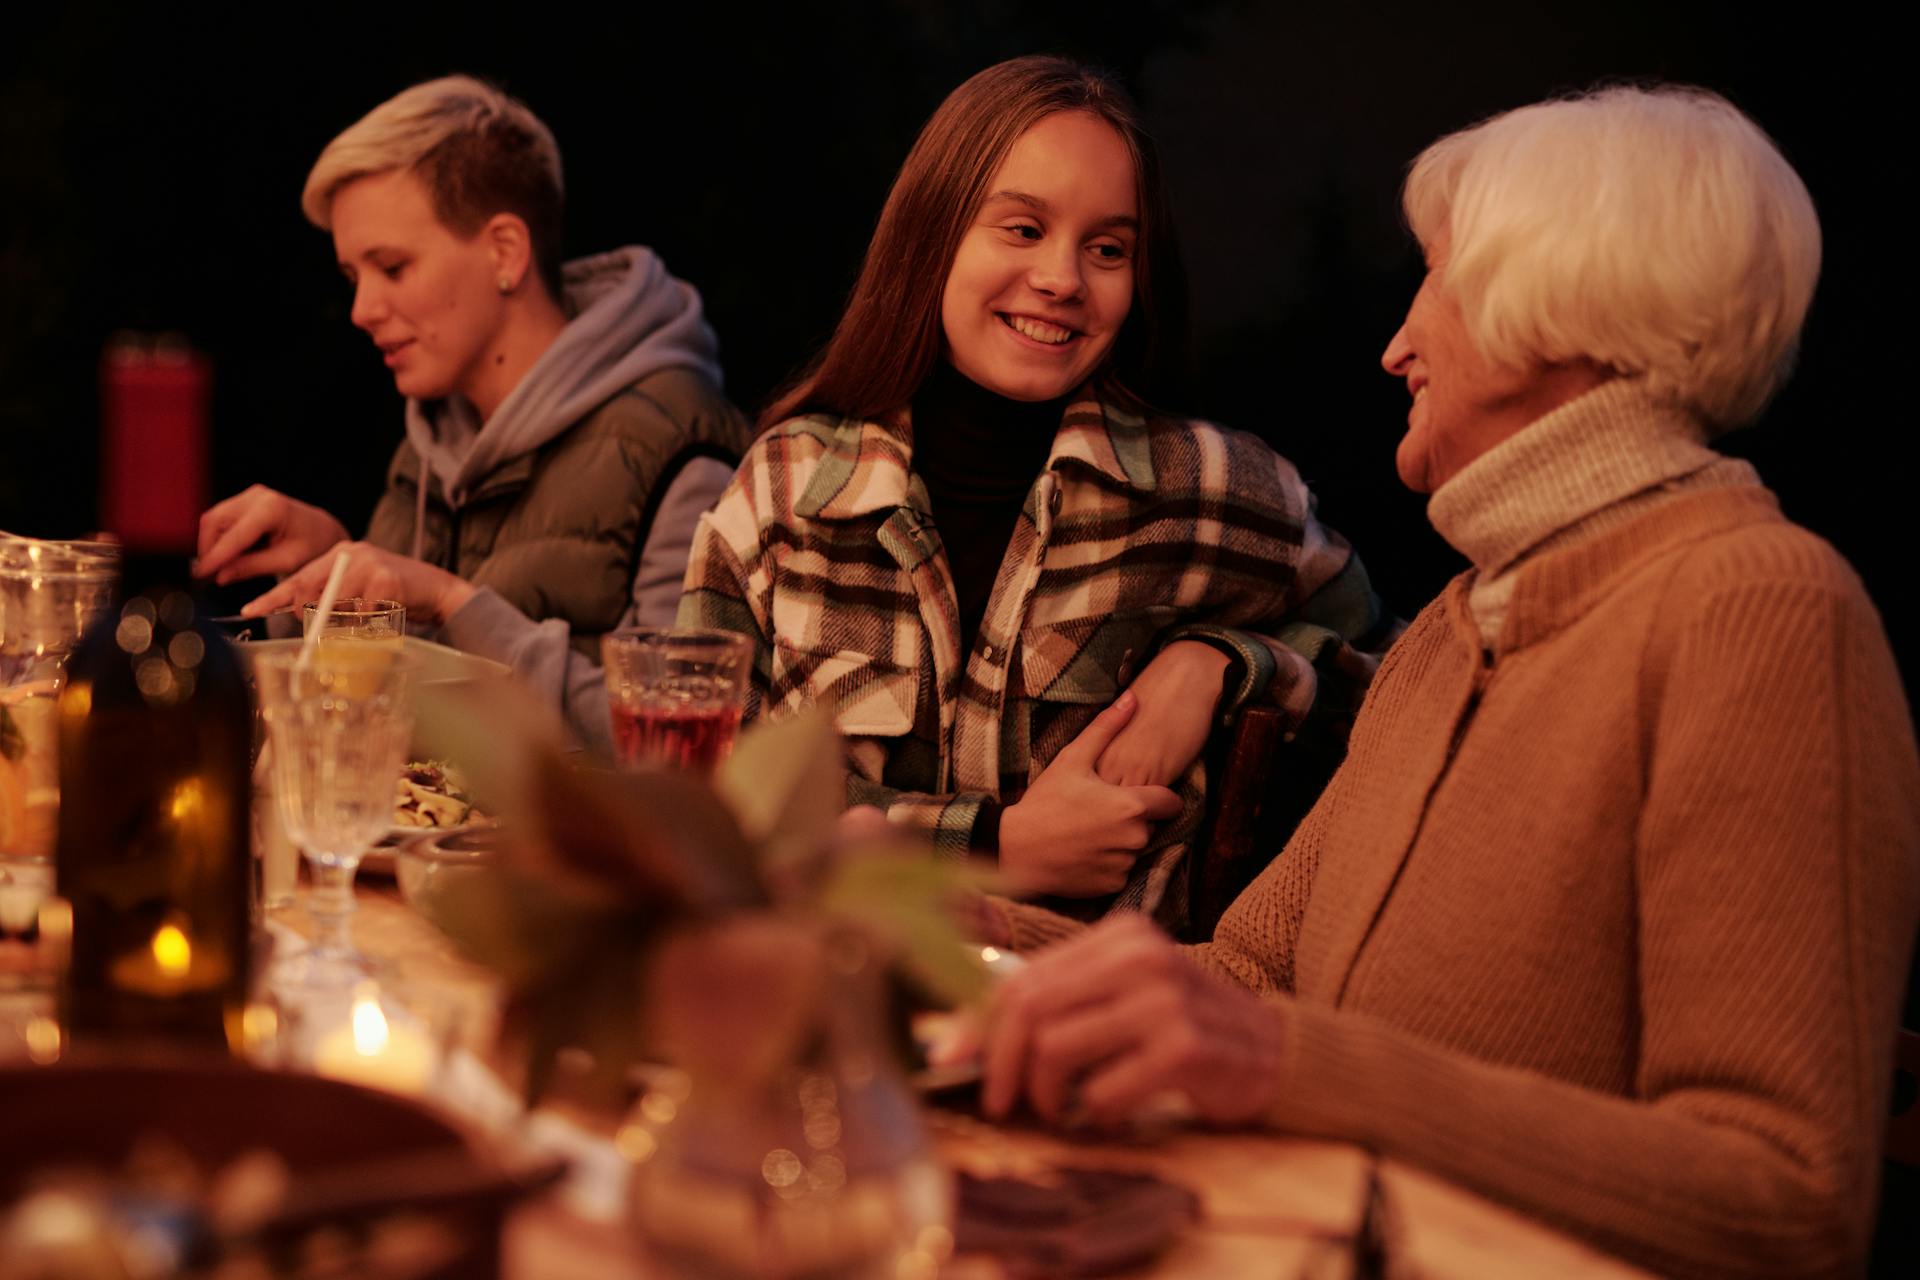 A young woman conversing with an elderly lady at the dinner table | Source: Pexels